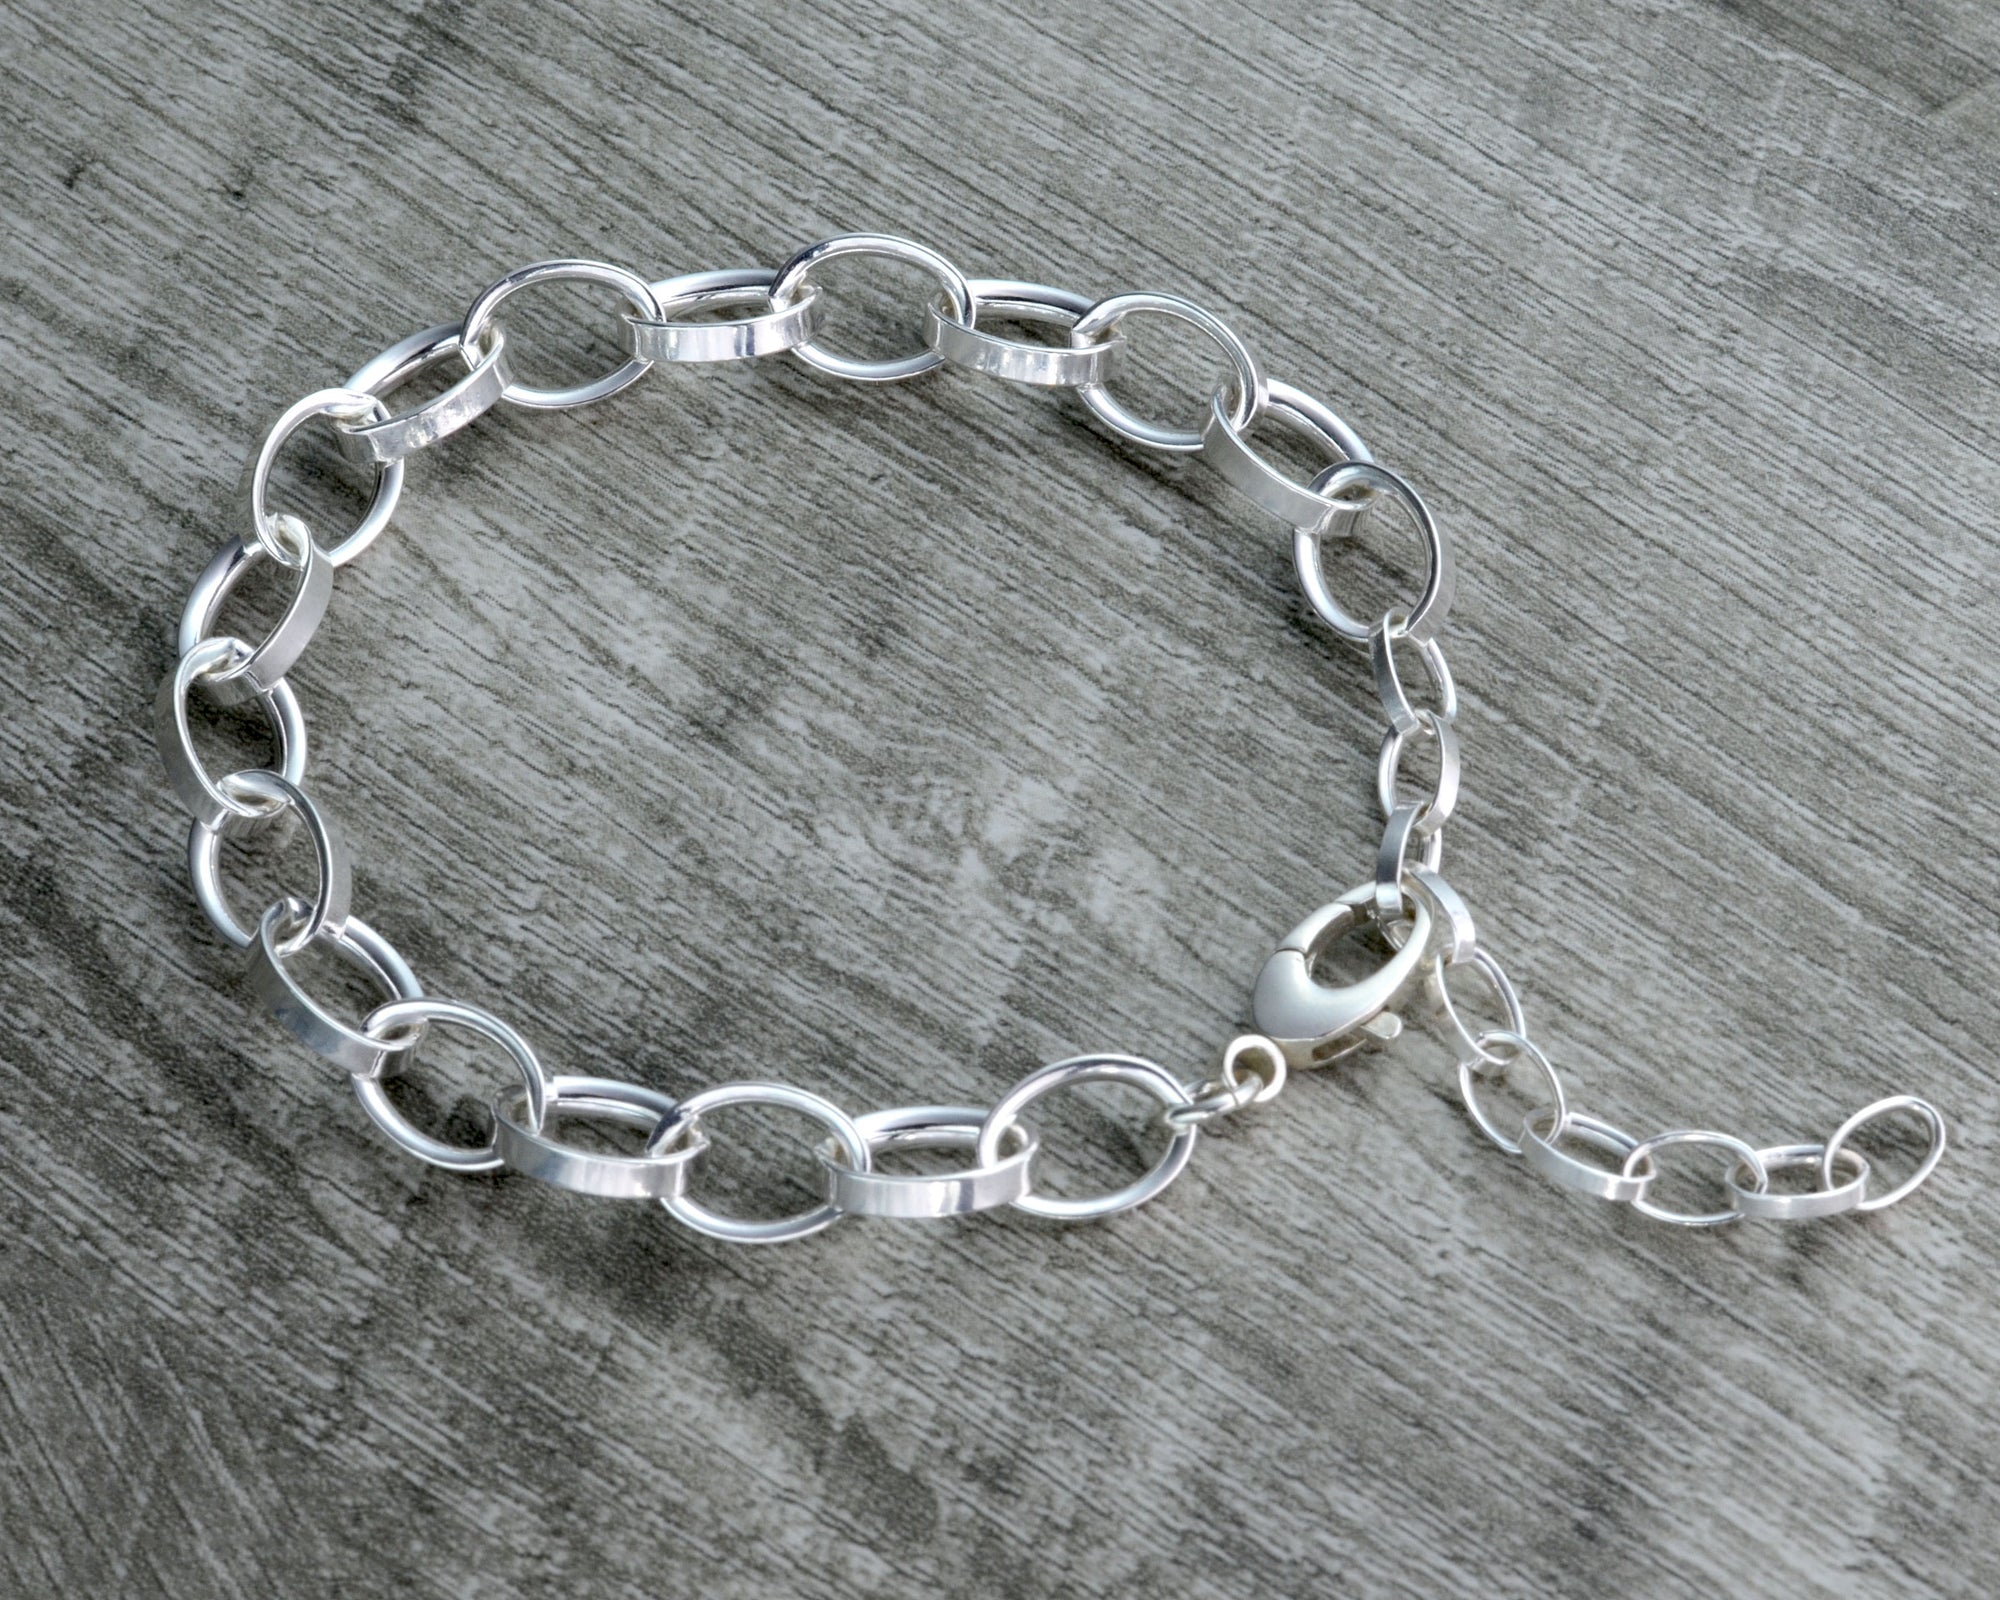 STERLING SILVER CHARM BRACELET WITH EXTENDER